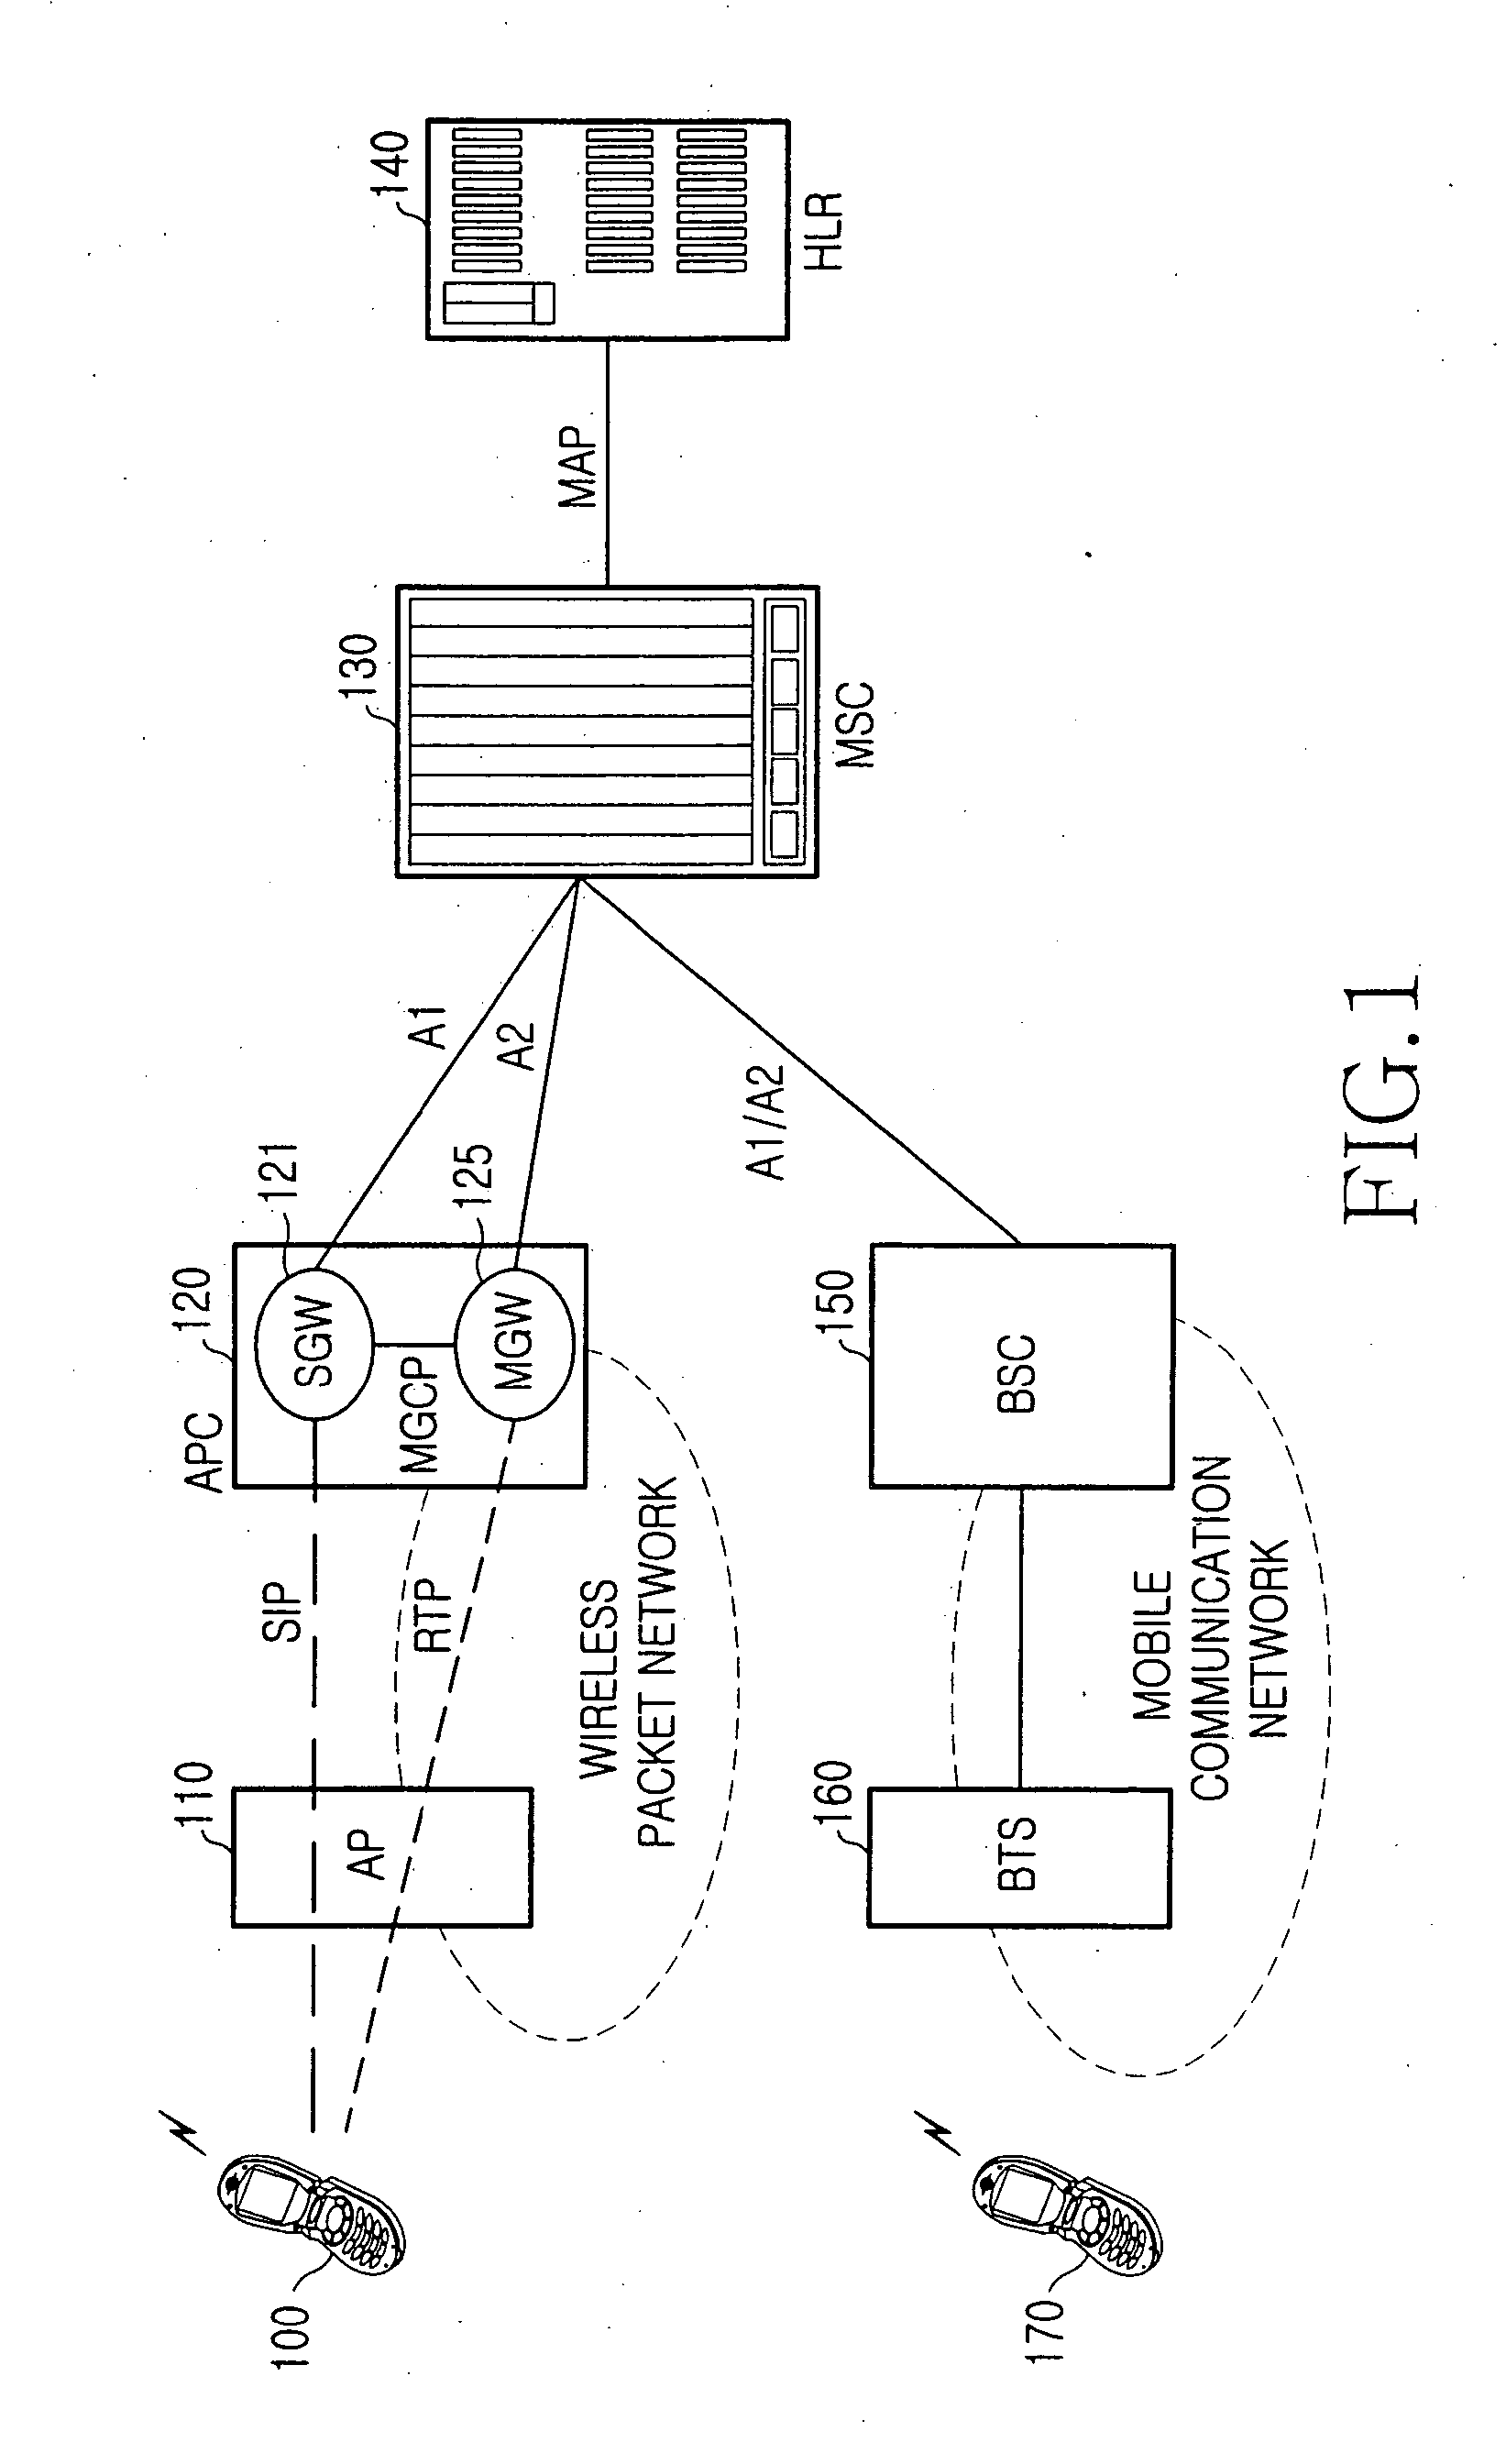 Network interworking system and method for providing seamless voice service and short message service between wireless communication networks